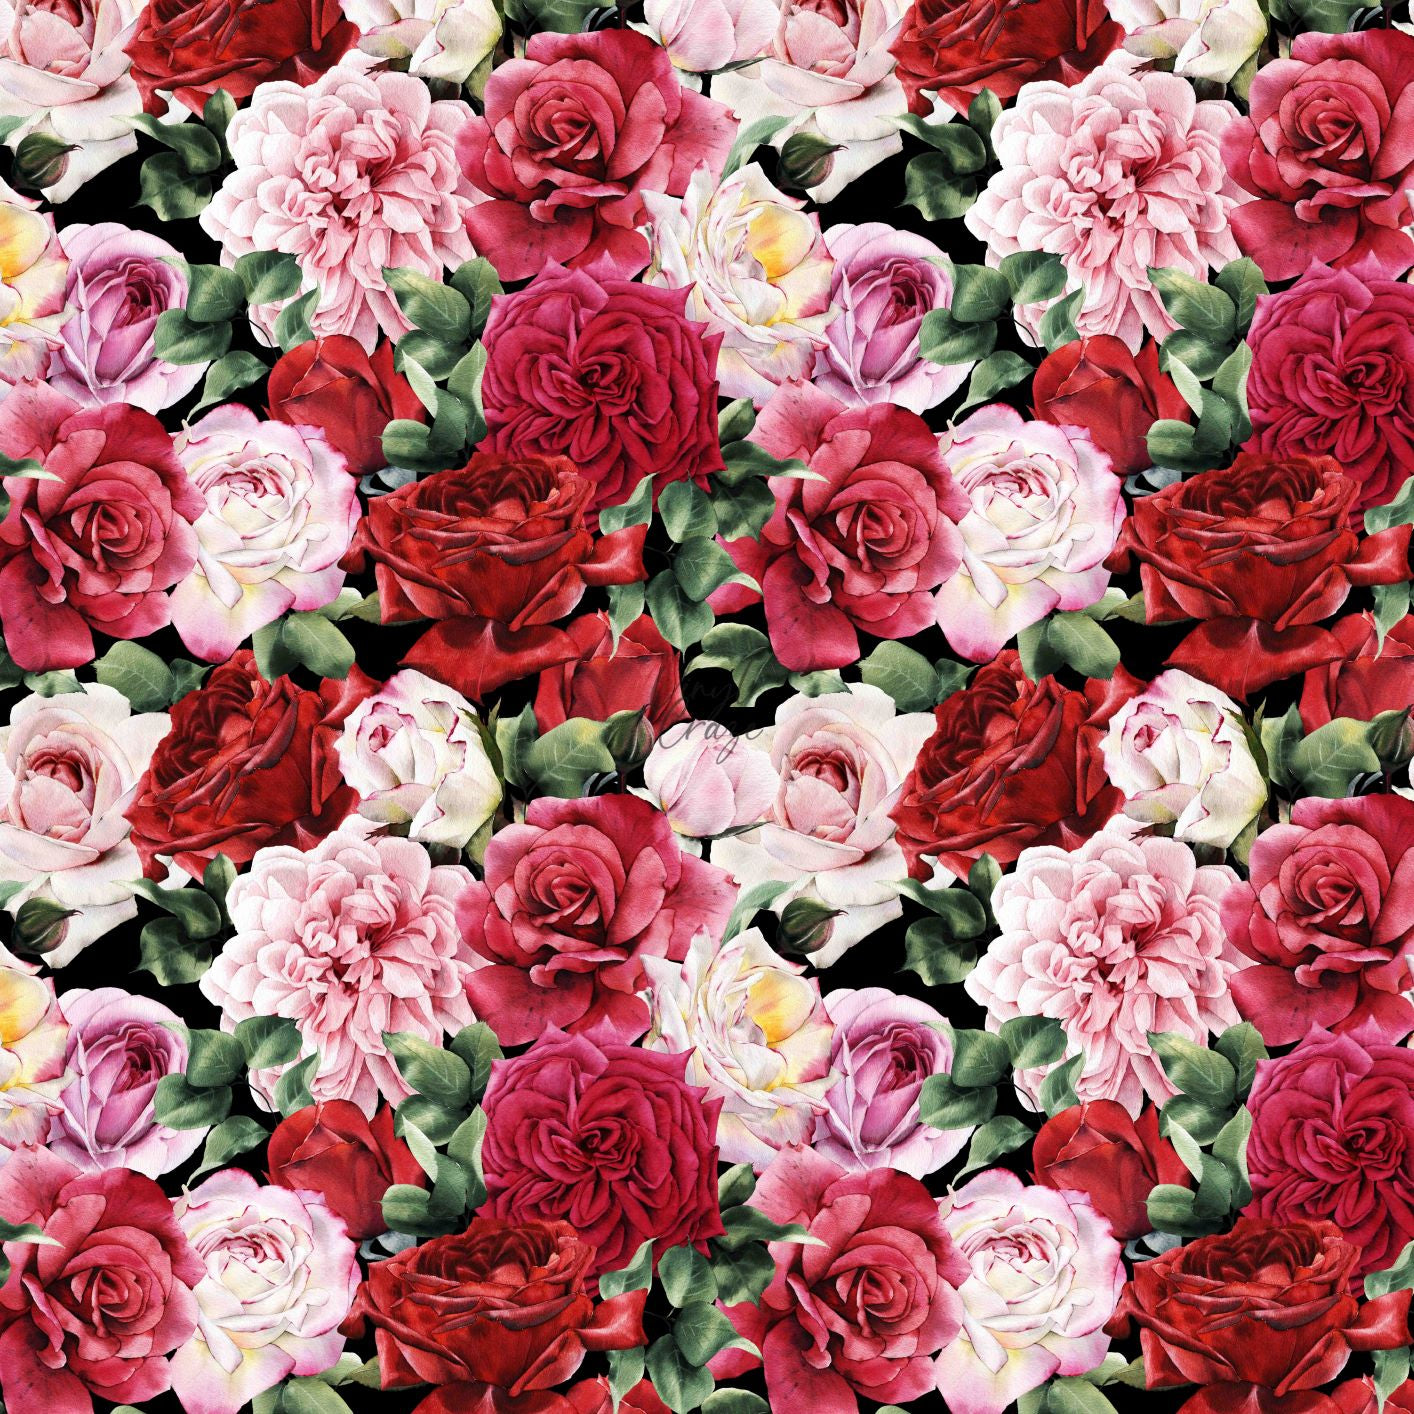 A Bed Of Red Flowers - Adhesive Vinyl